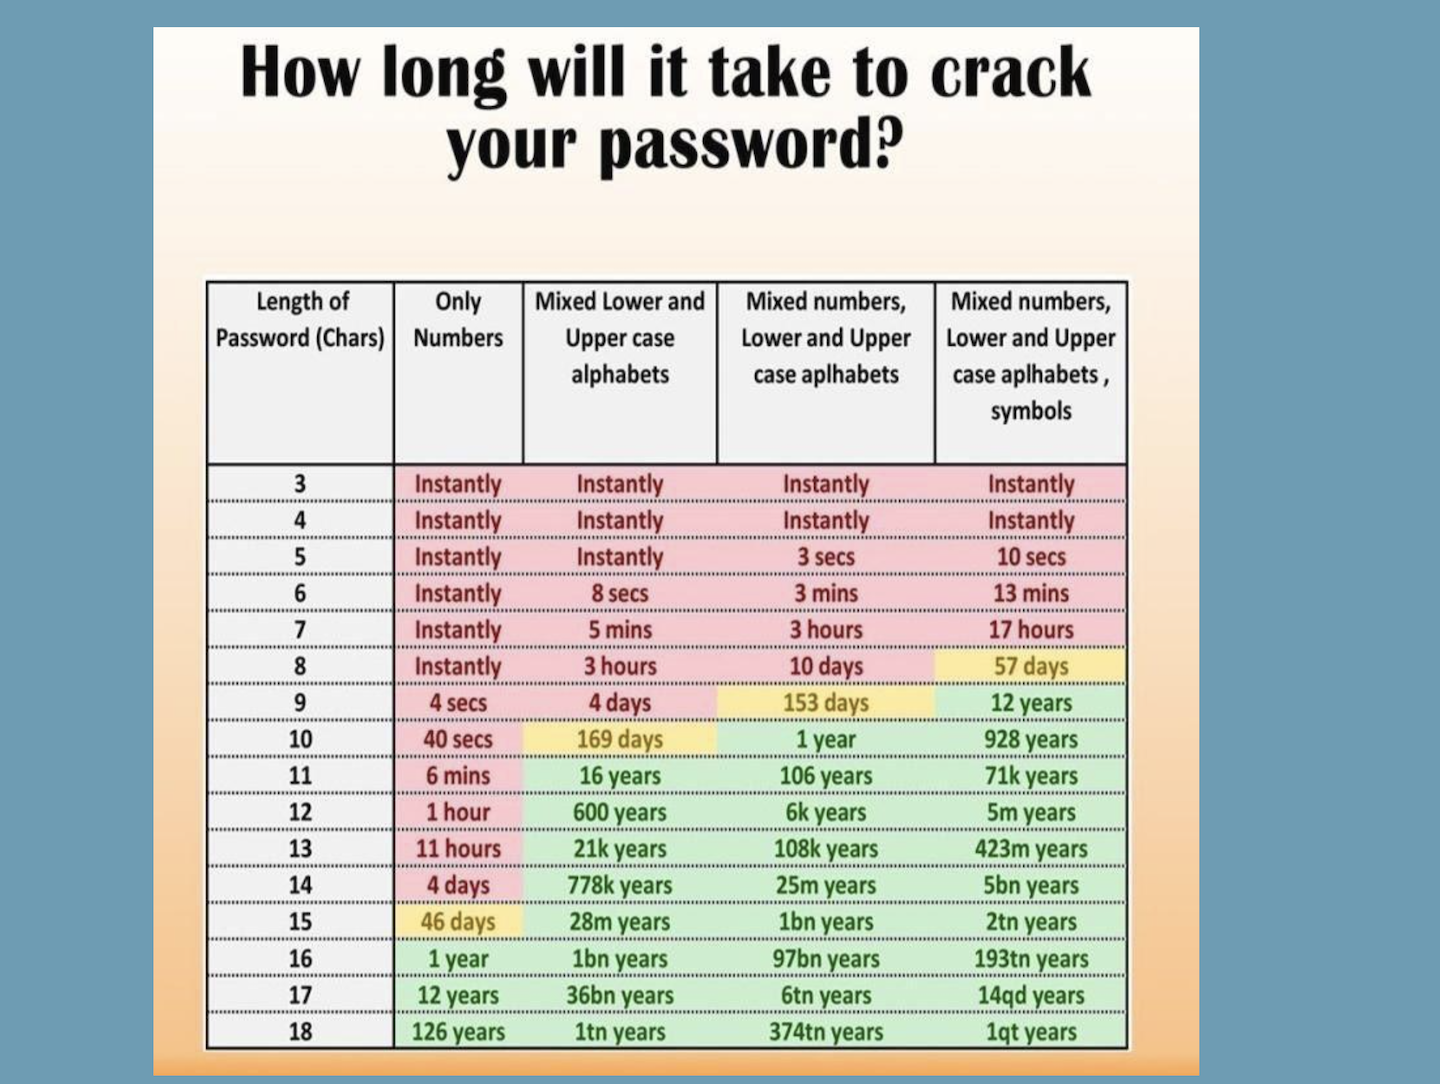 how long will it take to crack my password